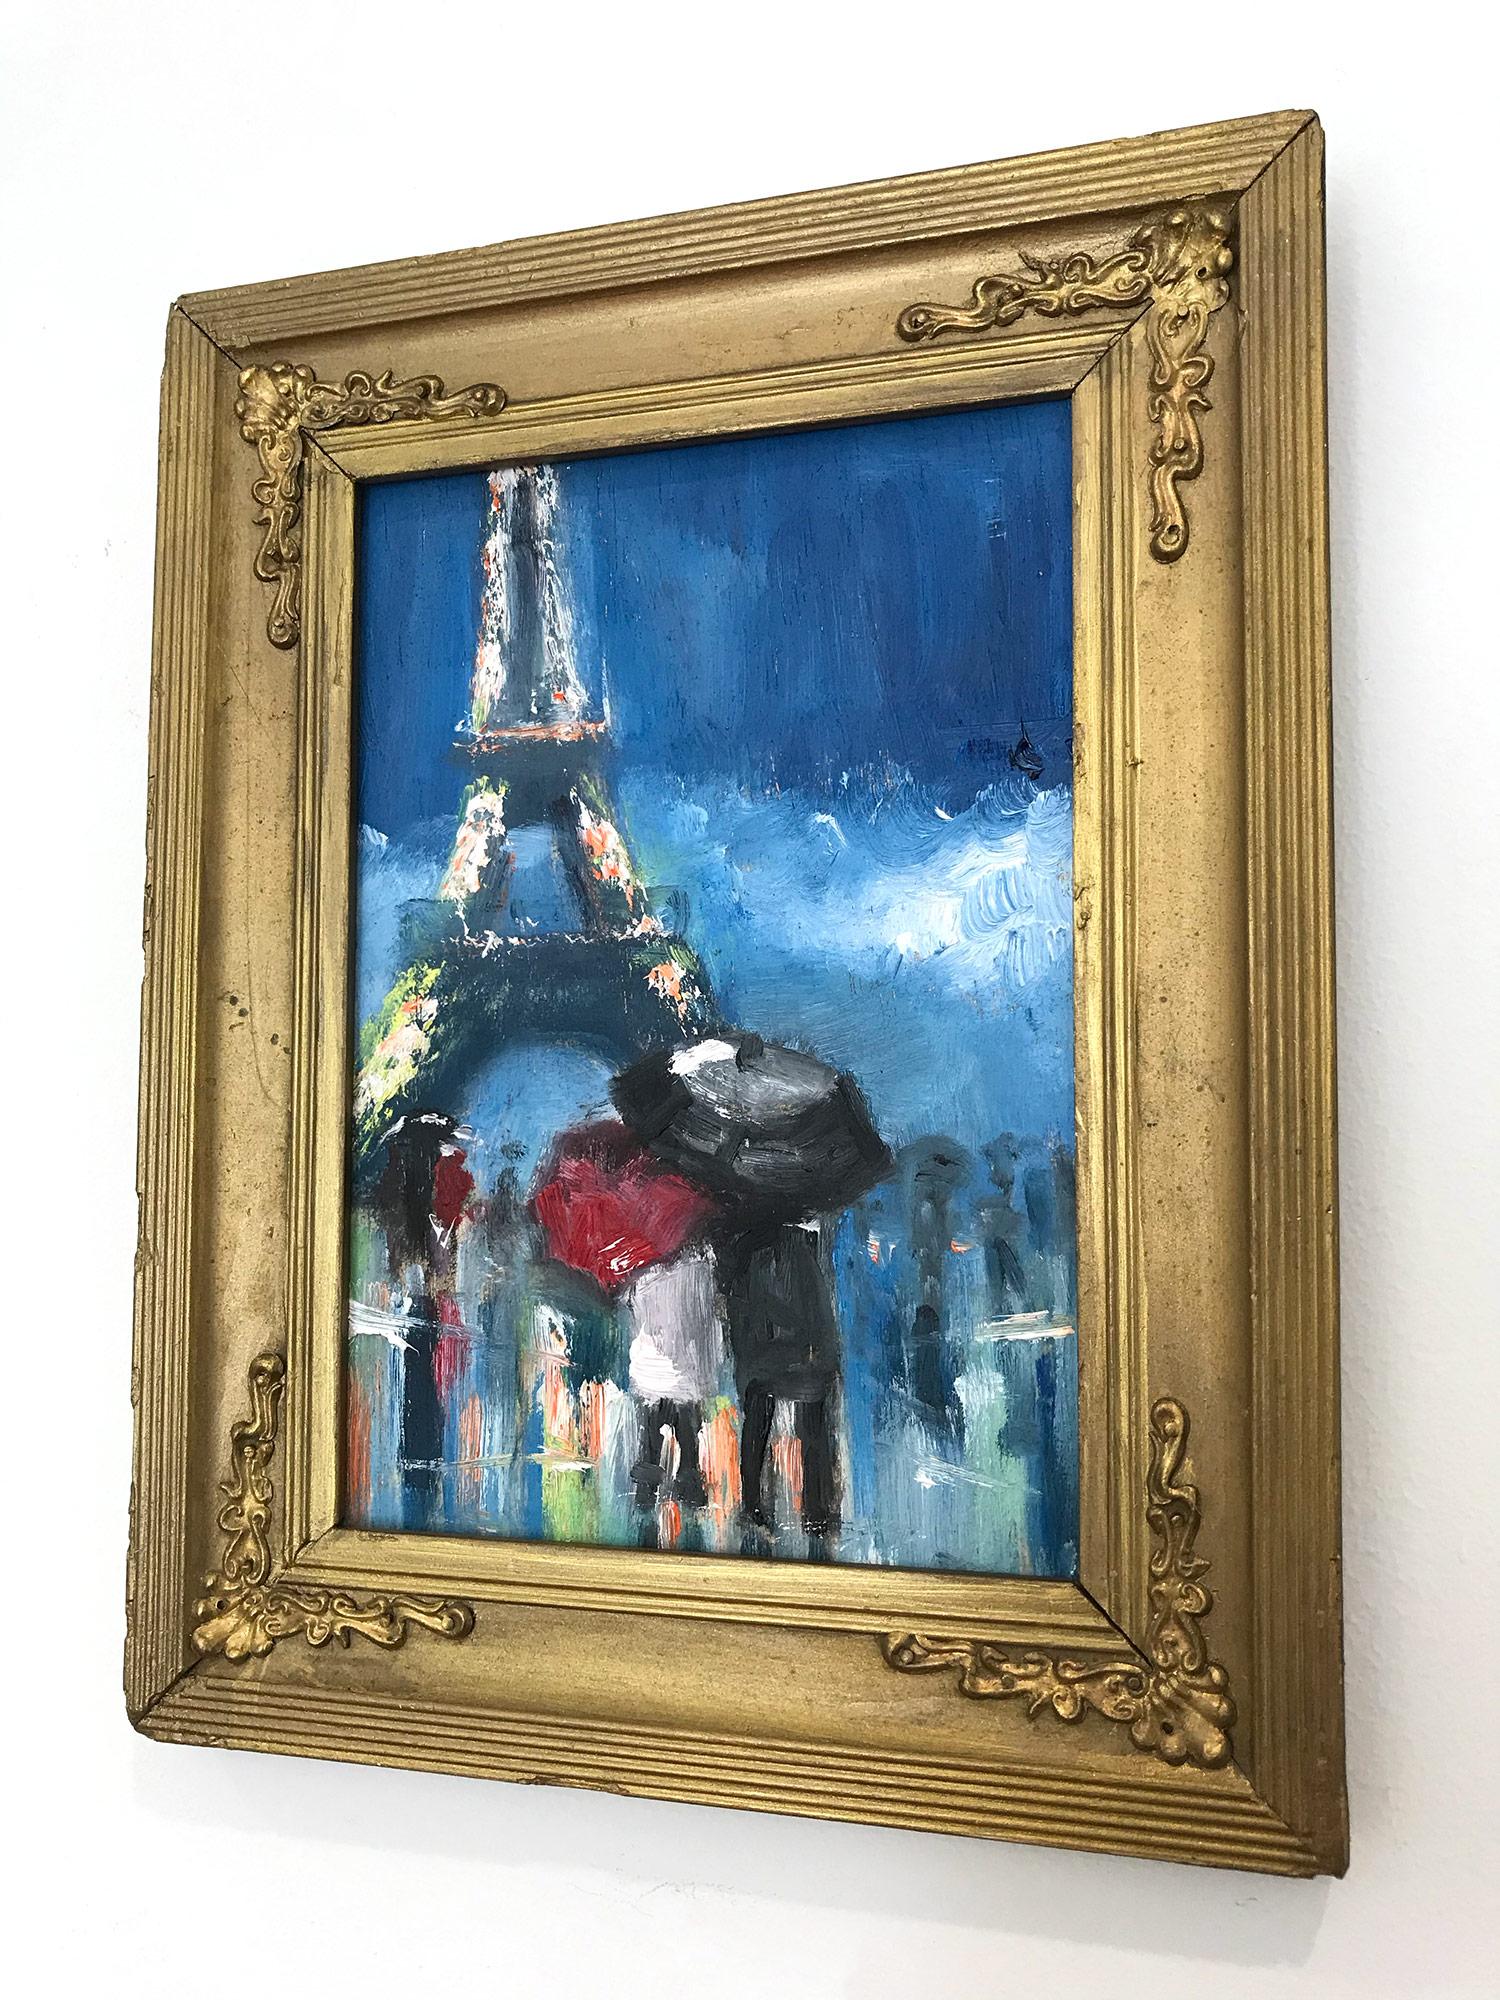 This painting depicts an impressionistic Plein Air scene of a couple under an umbrella by the Eiffel Tower in the rain. The thick brush strokes and fun marks creates an atmosphere reminiscent of the Ashcan School. There are figures situated in the